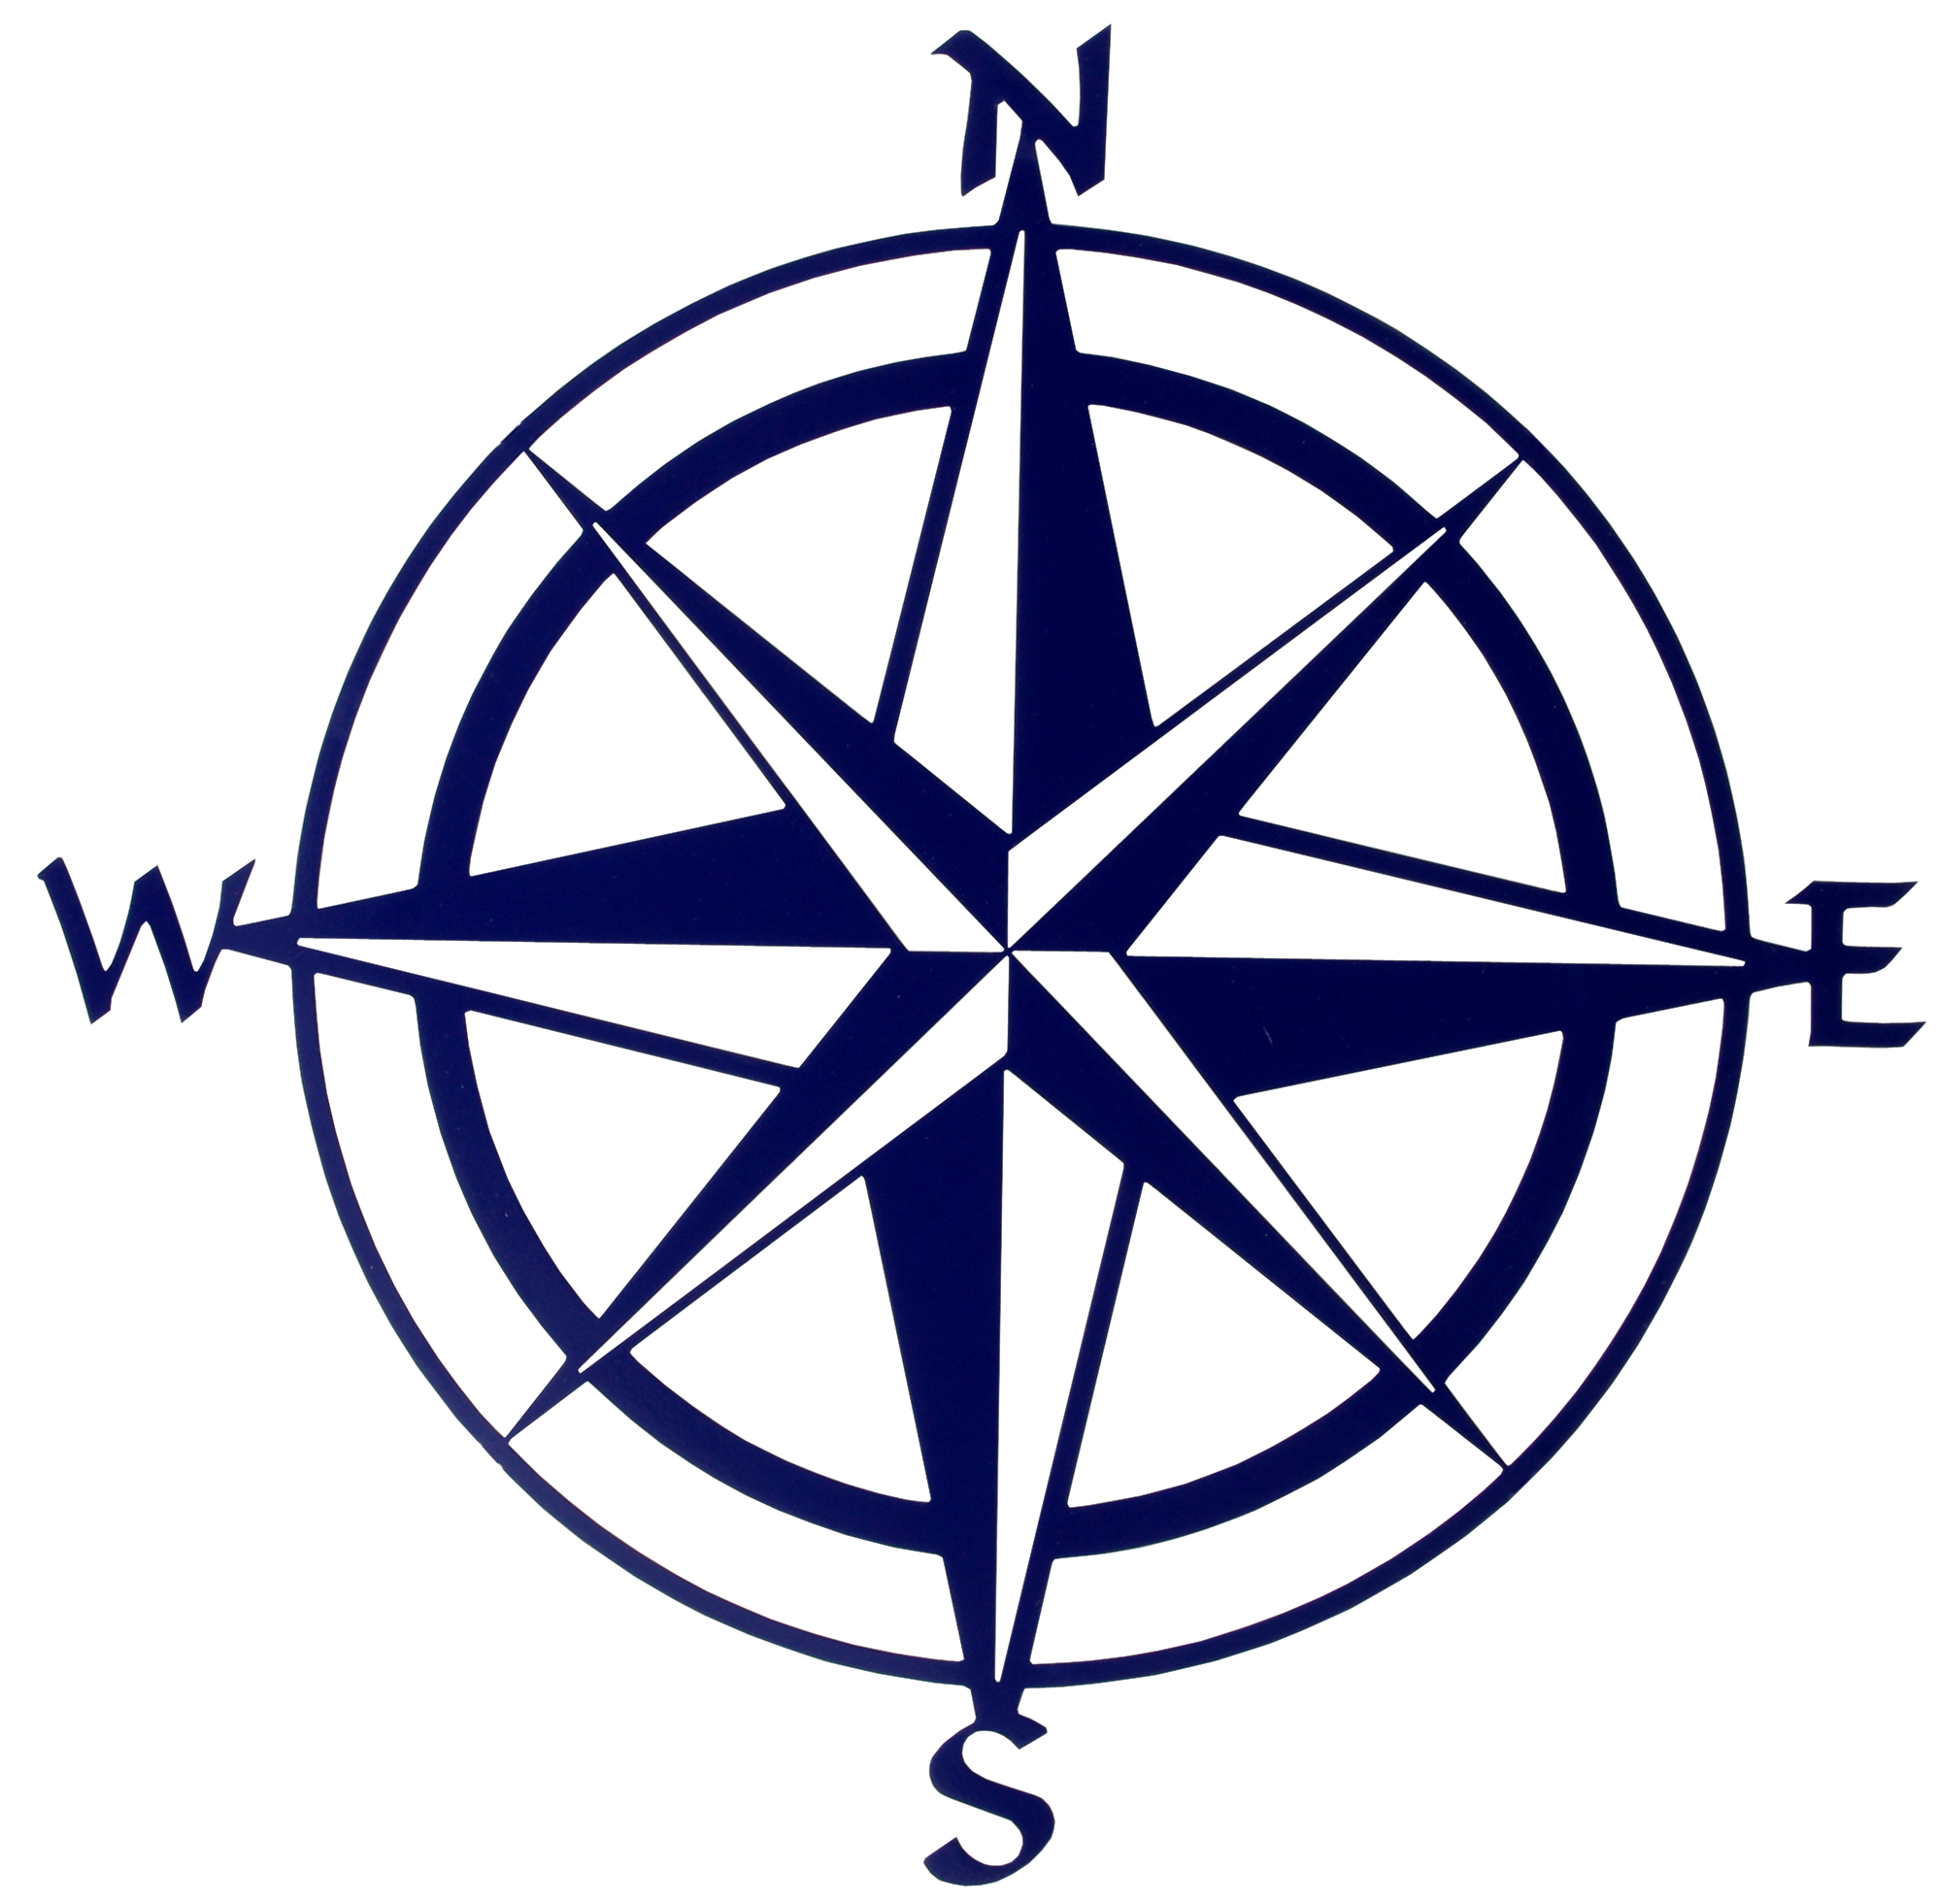 Simple Compass Icon - ClipArt Best